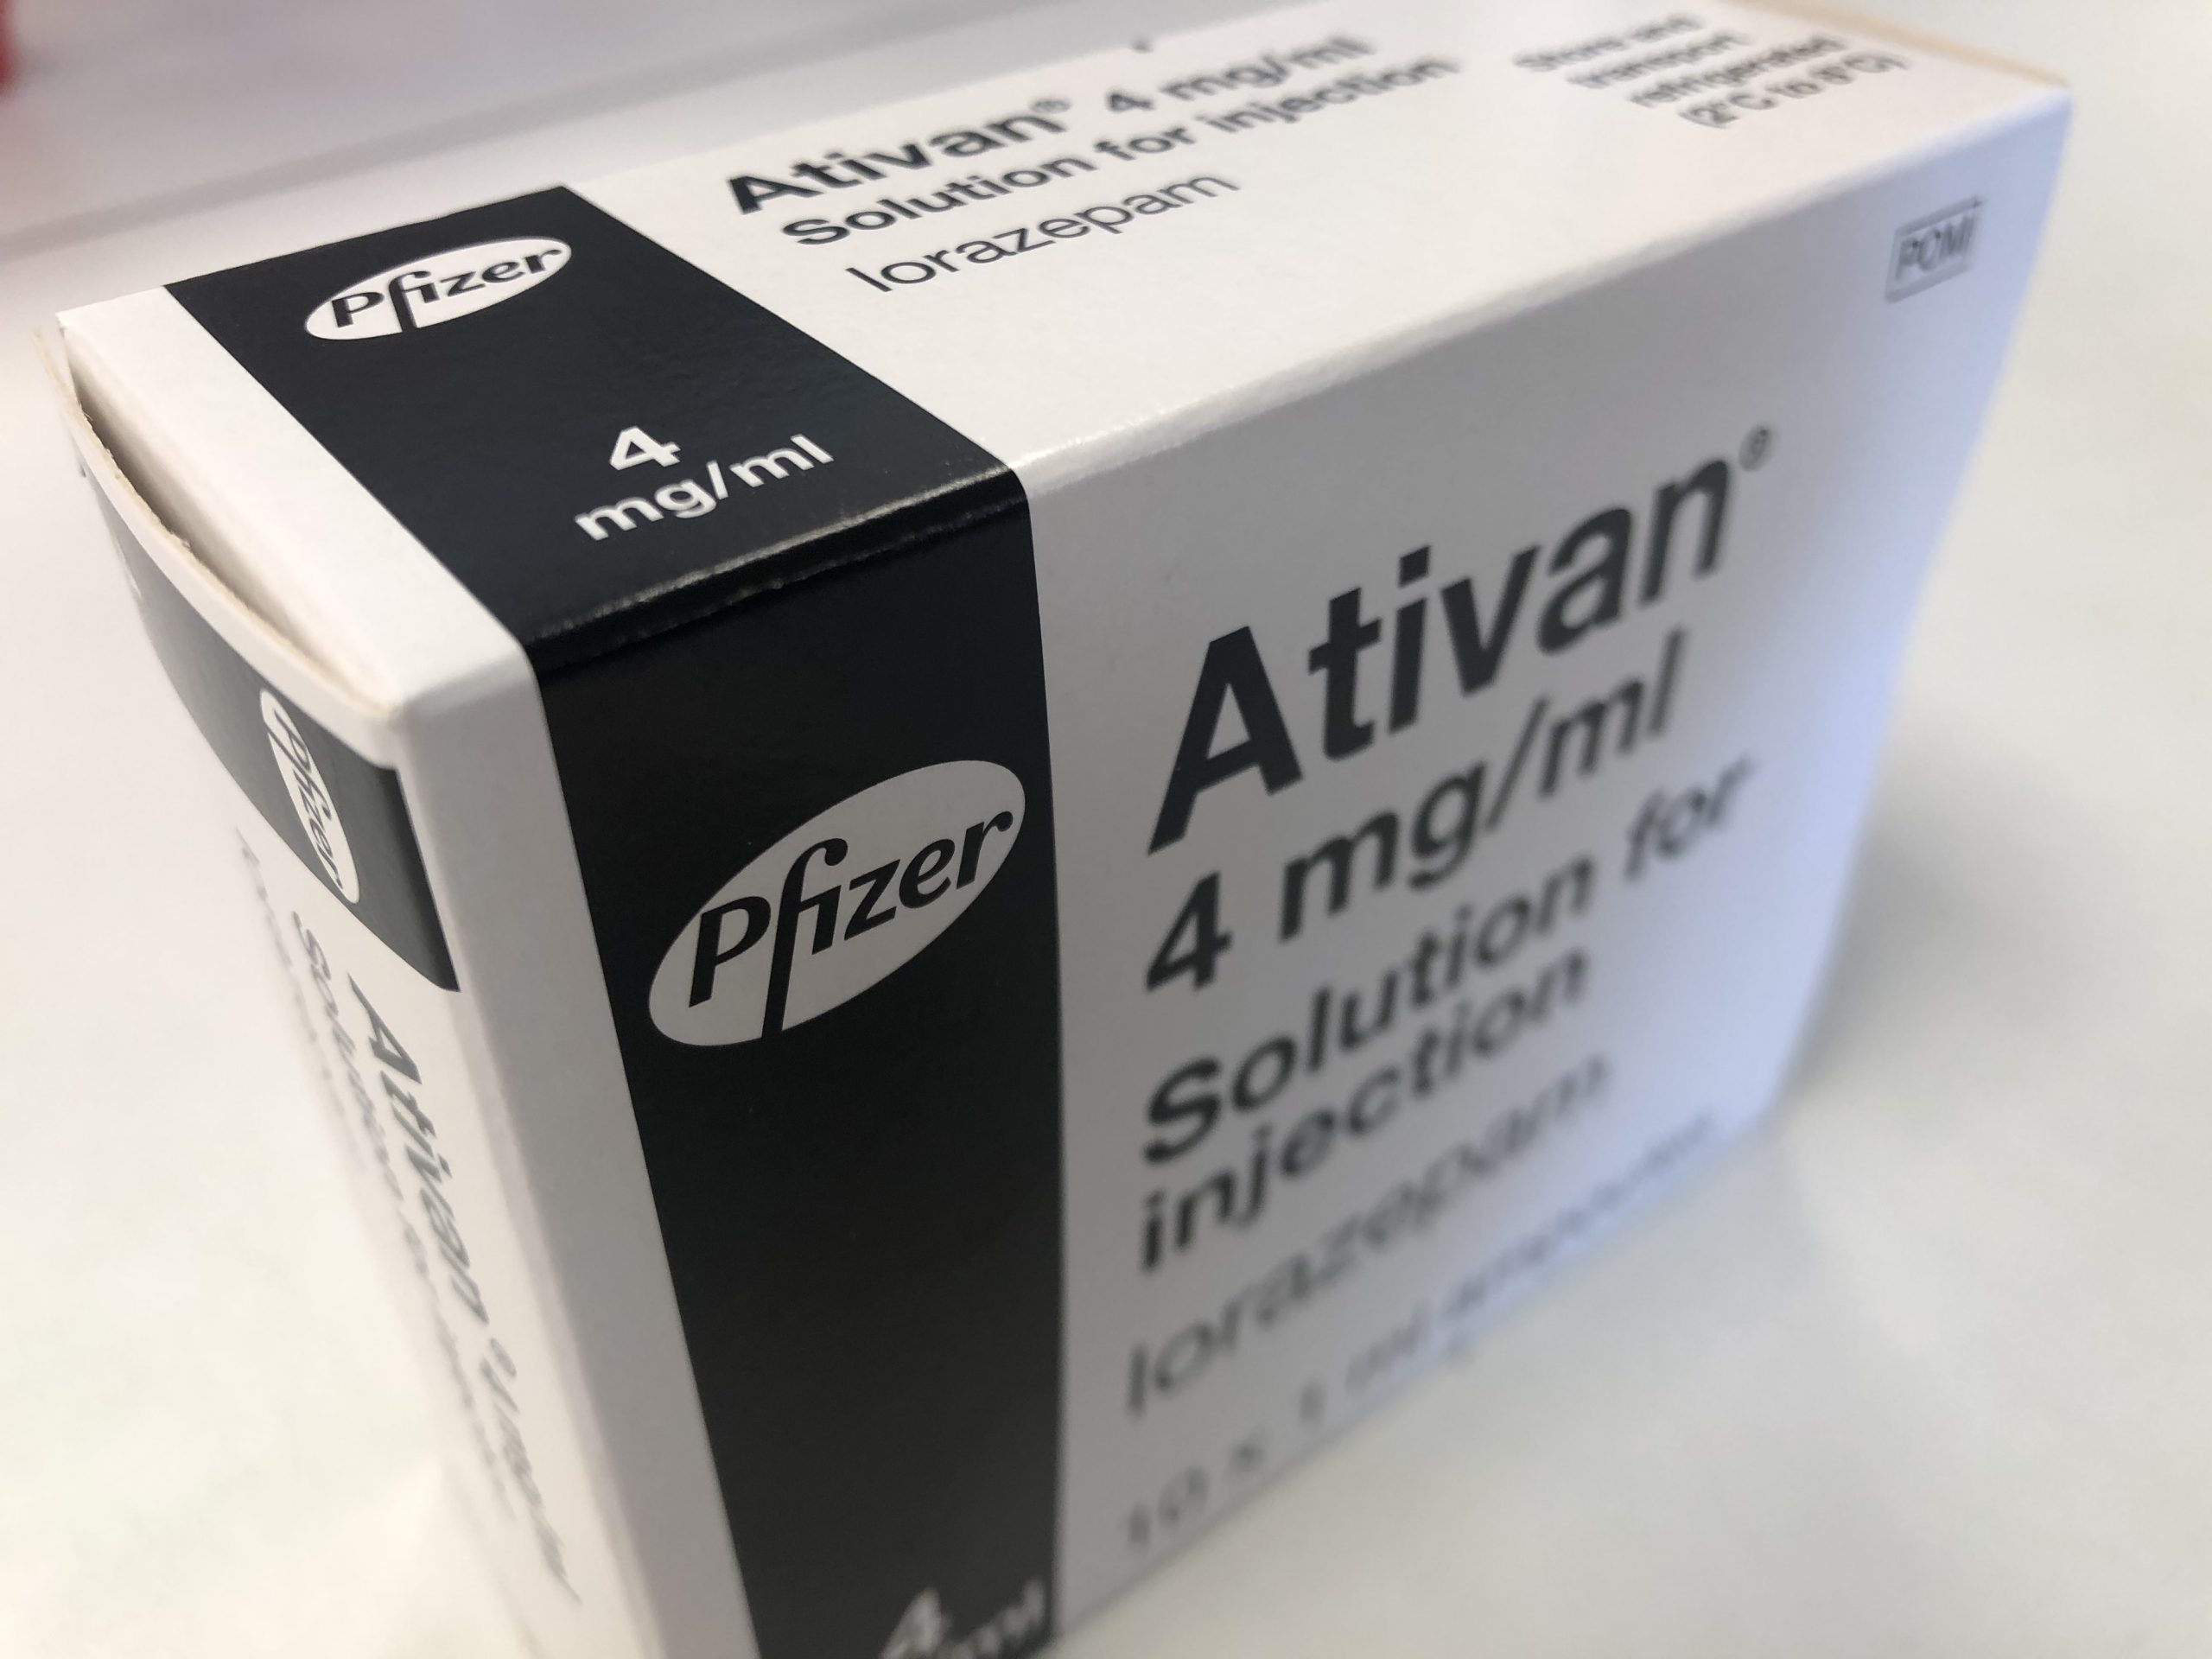 Lorazepam (Ativan®) 4mg/mL Injection NOW AVAILABLE Speeds Healthcare